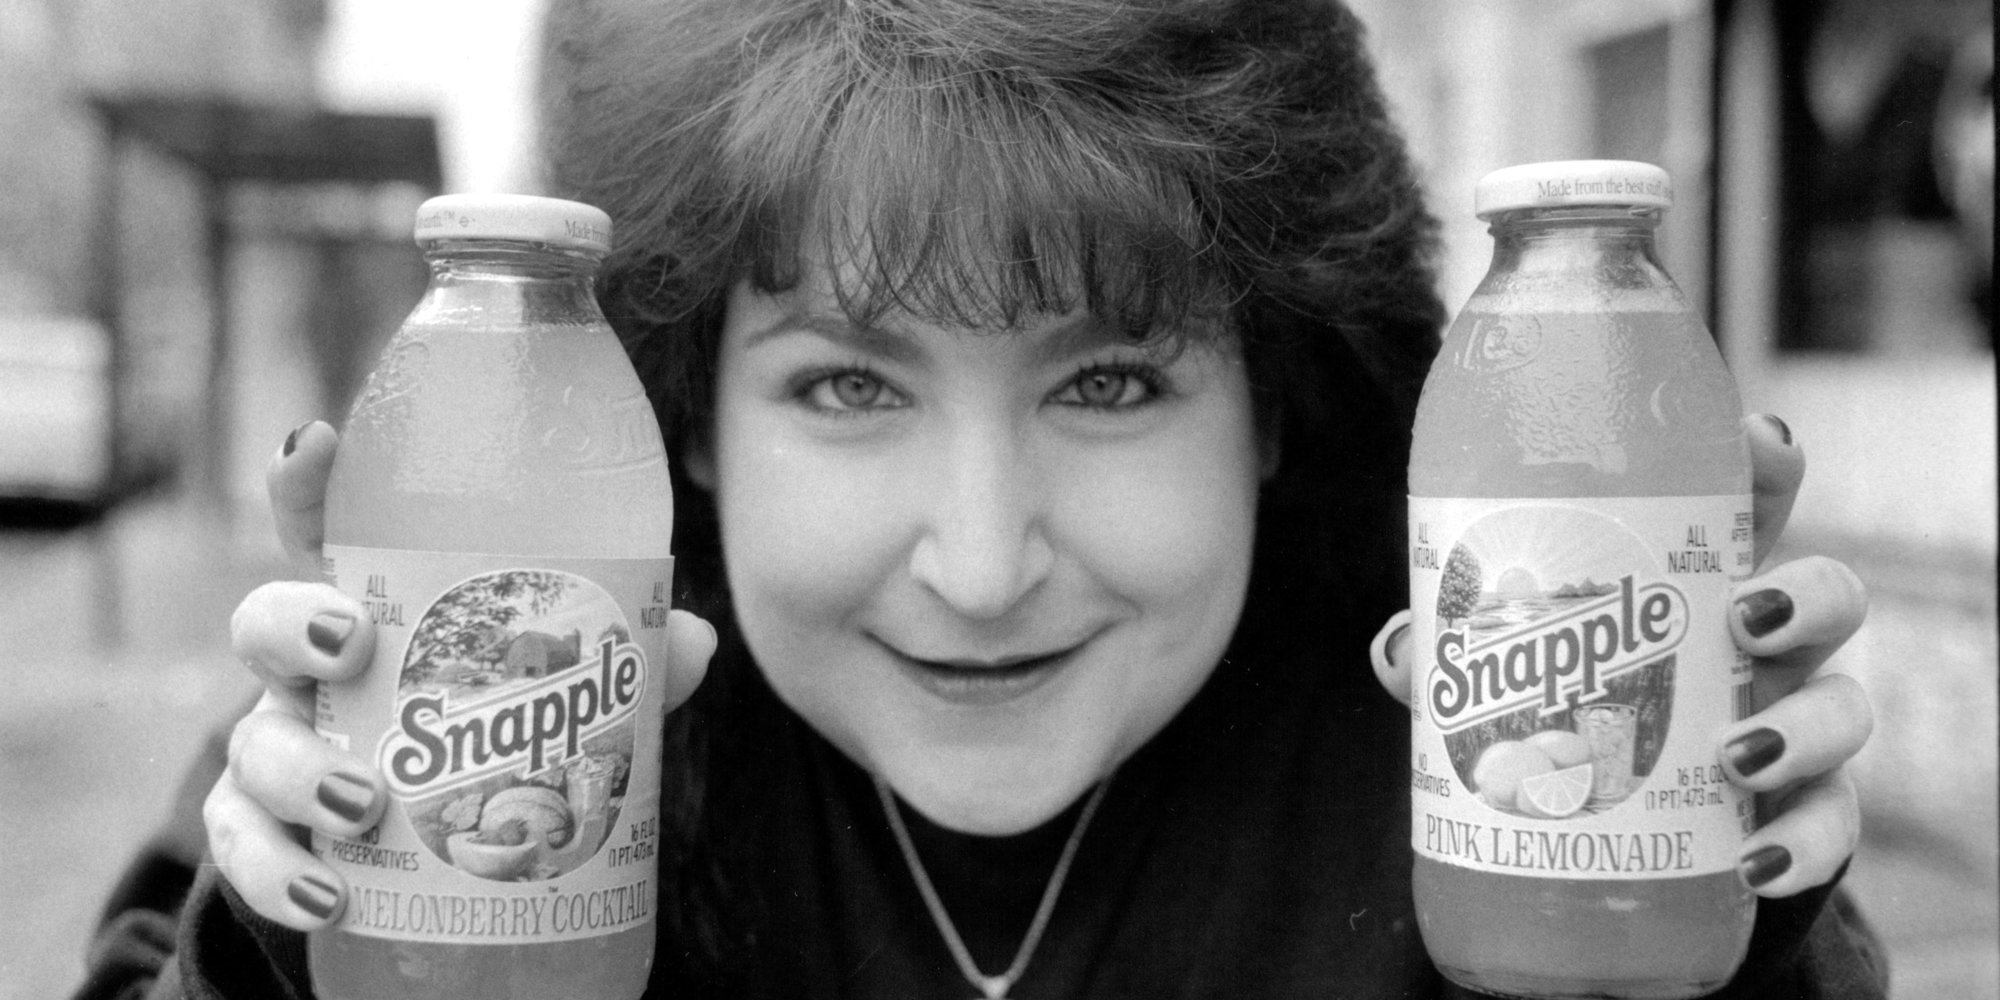 "Snapple Lady" Opens Up About Cocaine Addiction